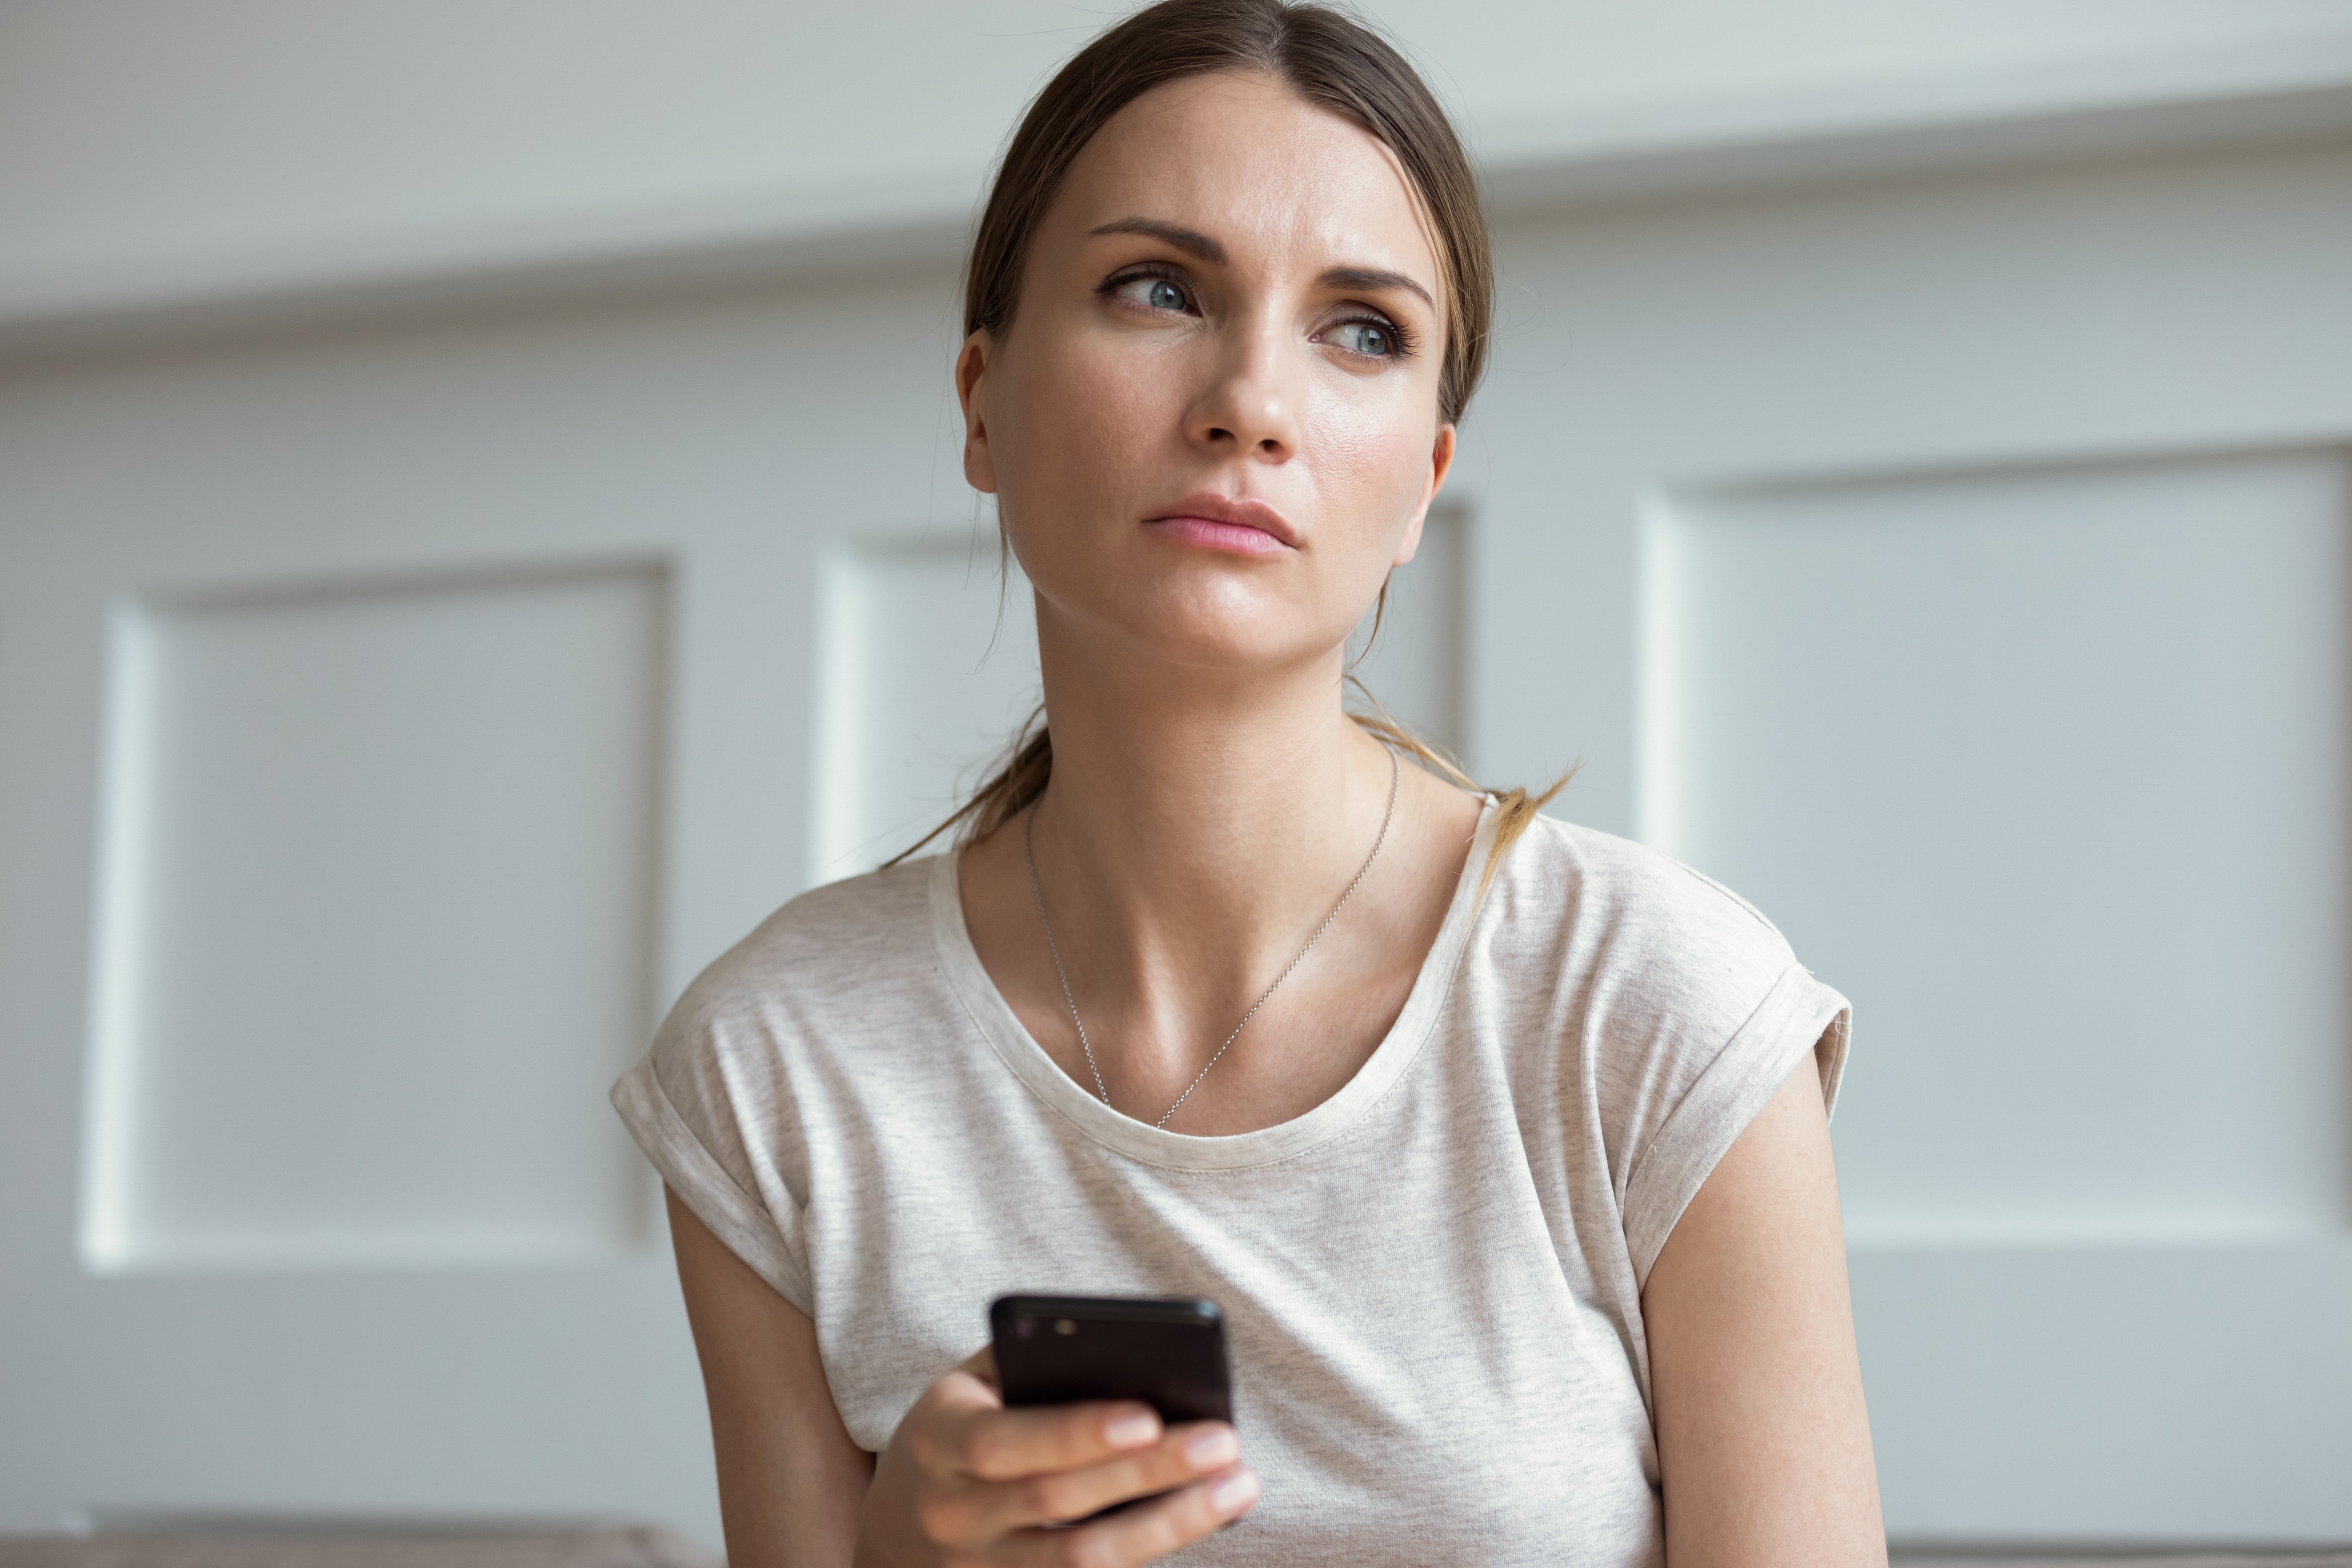 A woman holding a phone while looking thoughtful | Source: Shutterstock